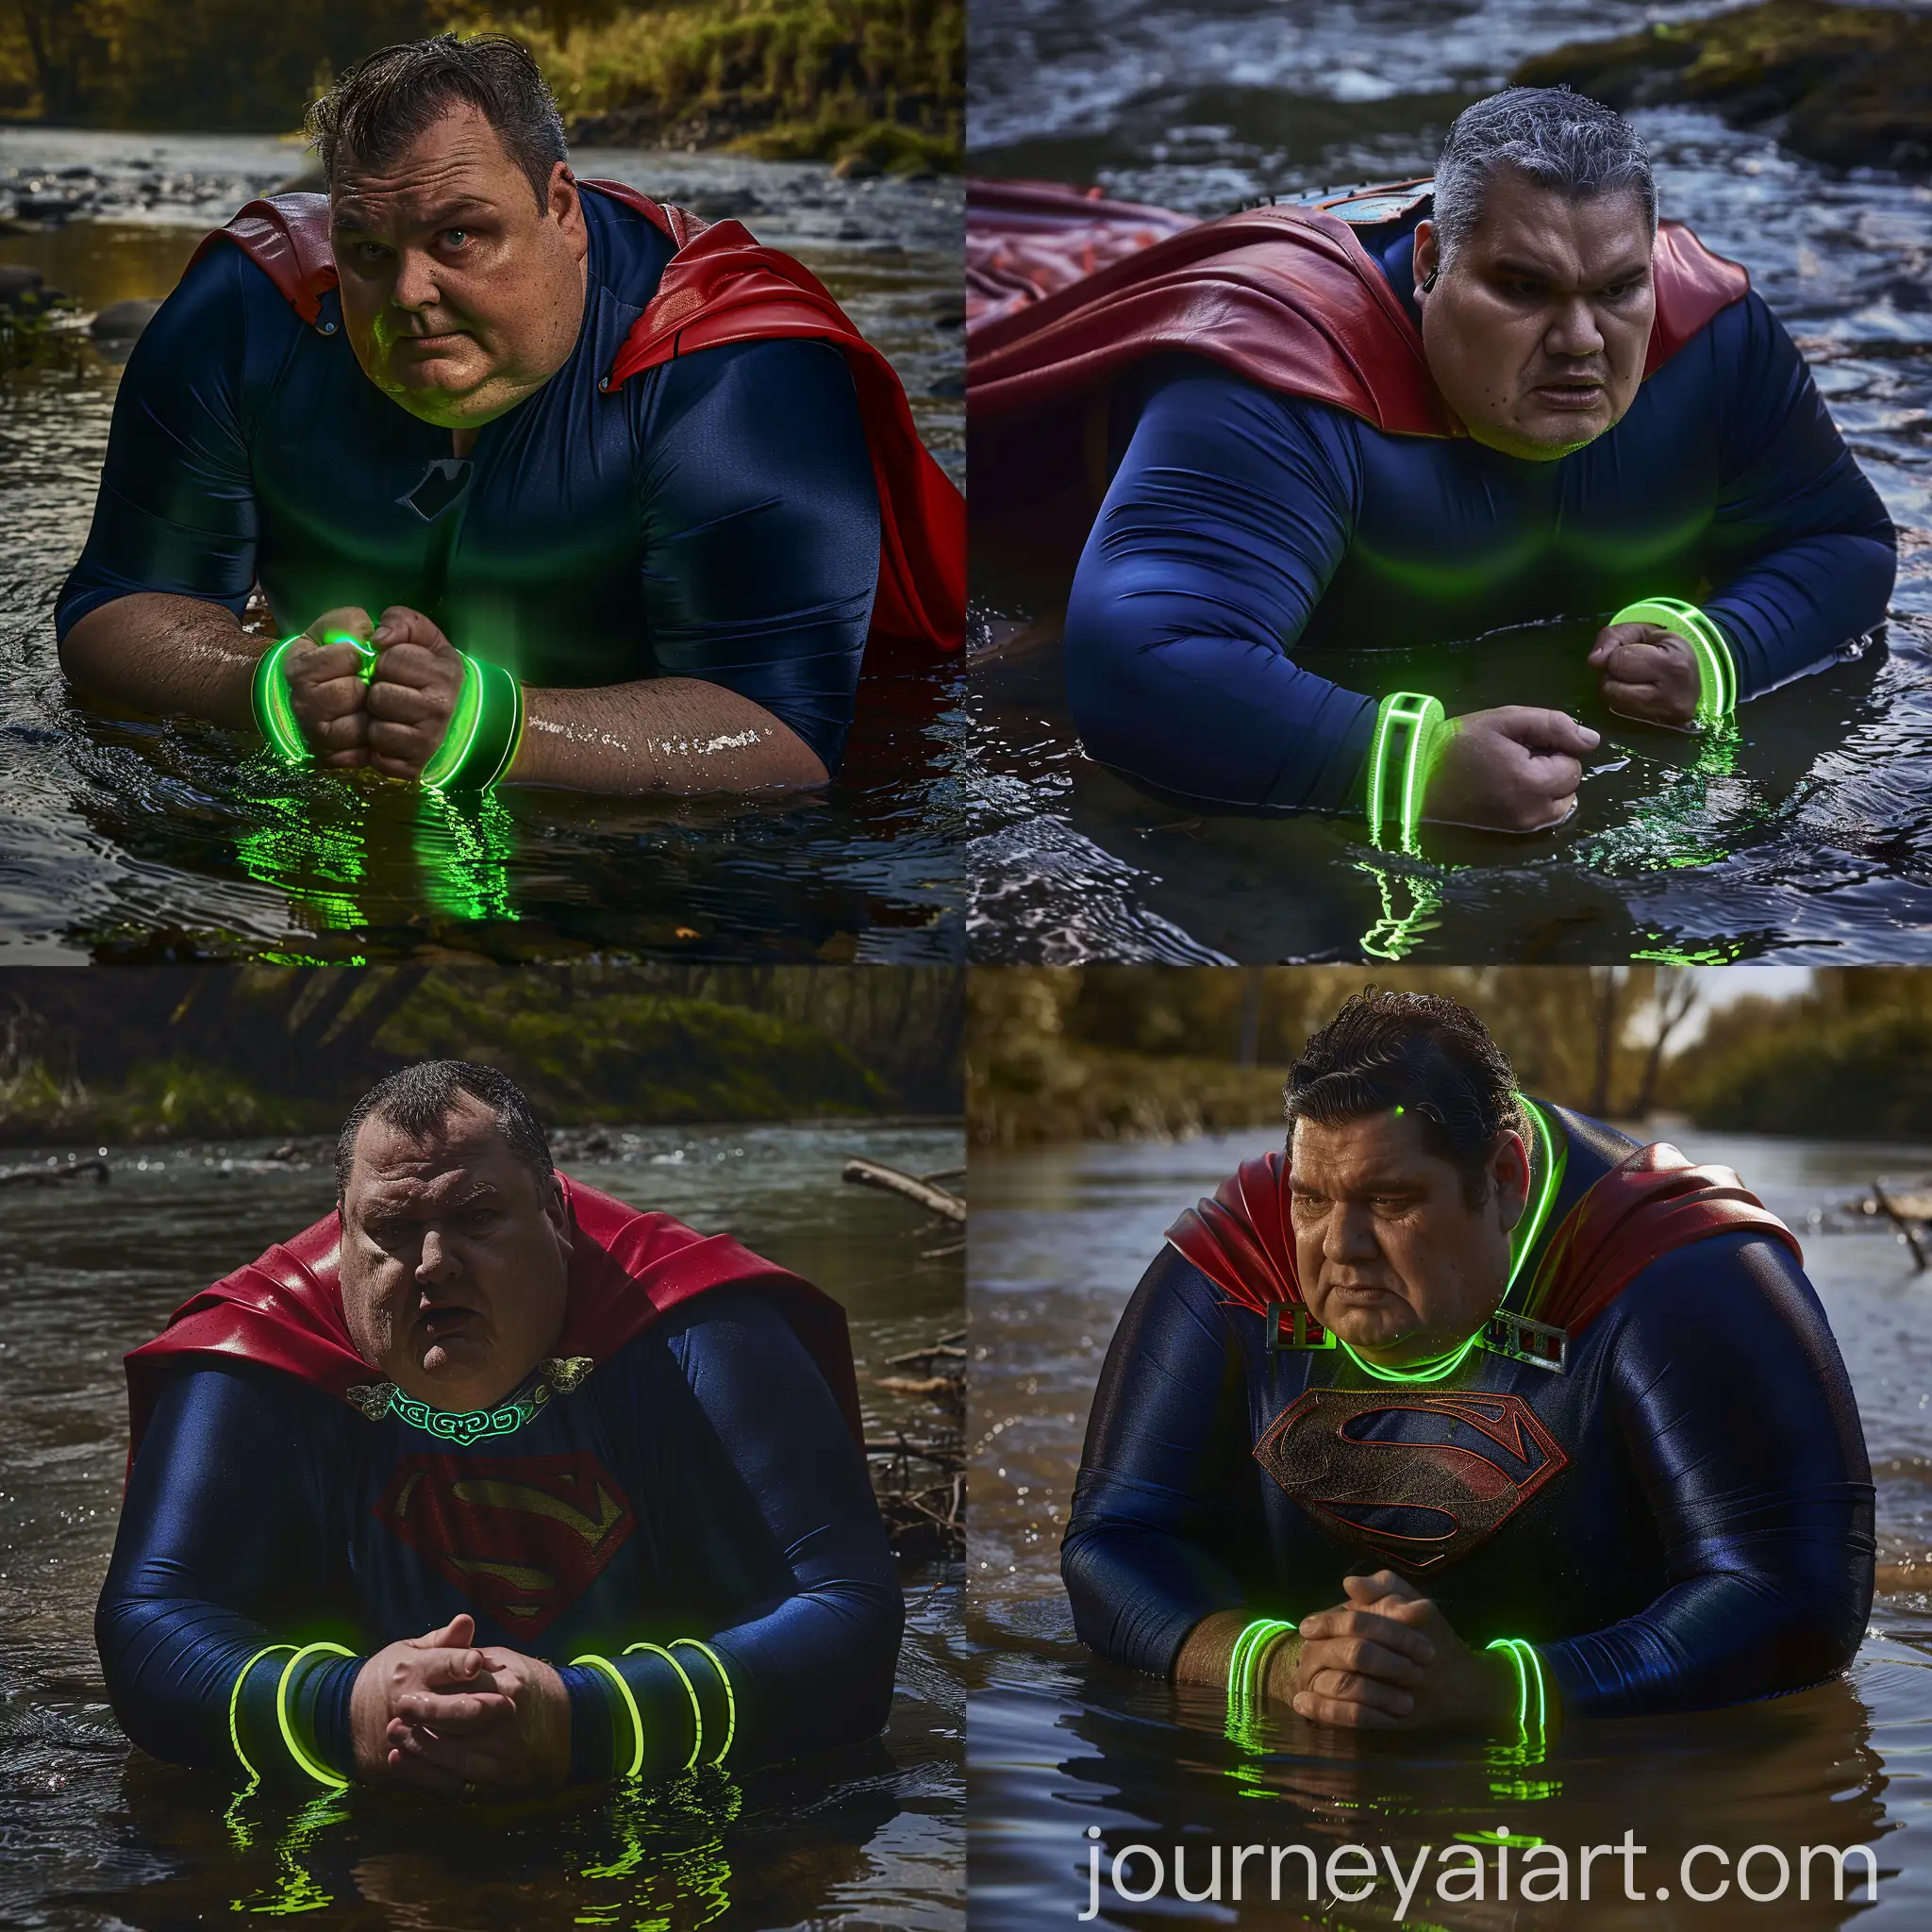 Fearful-Elderly-Man-in-Superman-Costume-with-Glowing-Cuffs-Crawling-in-River